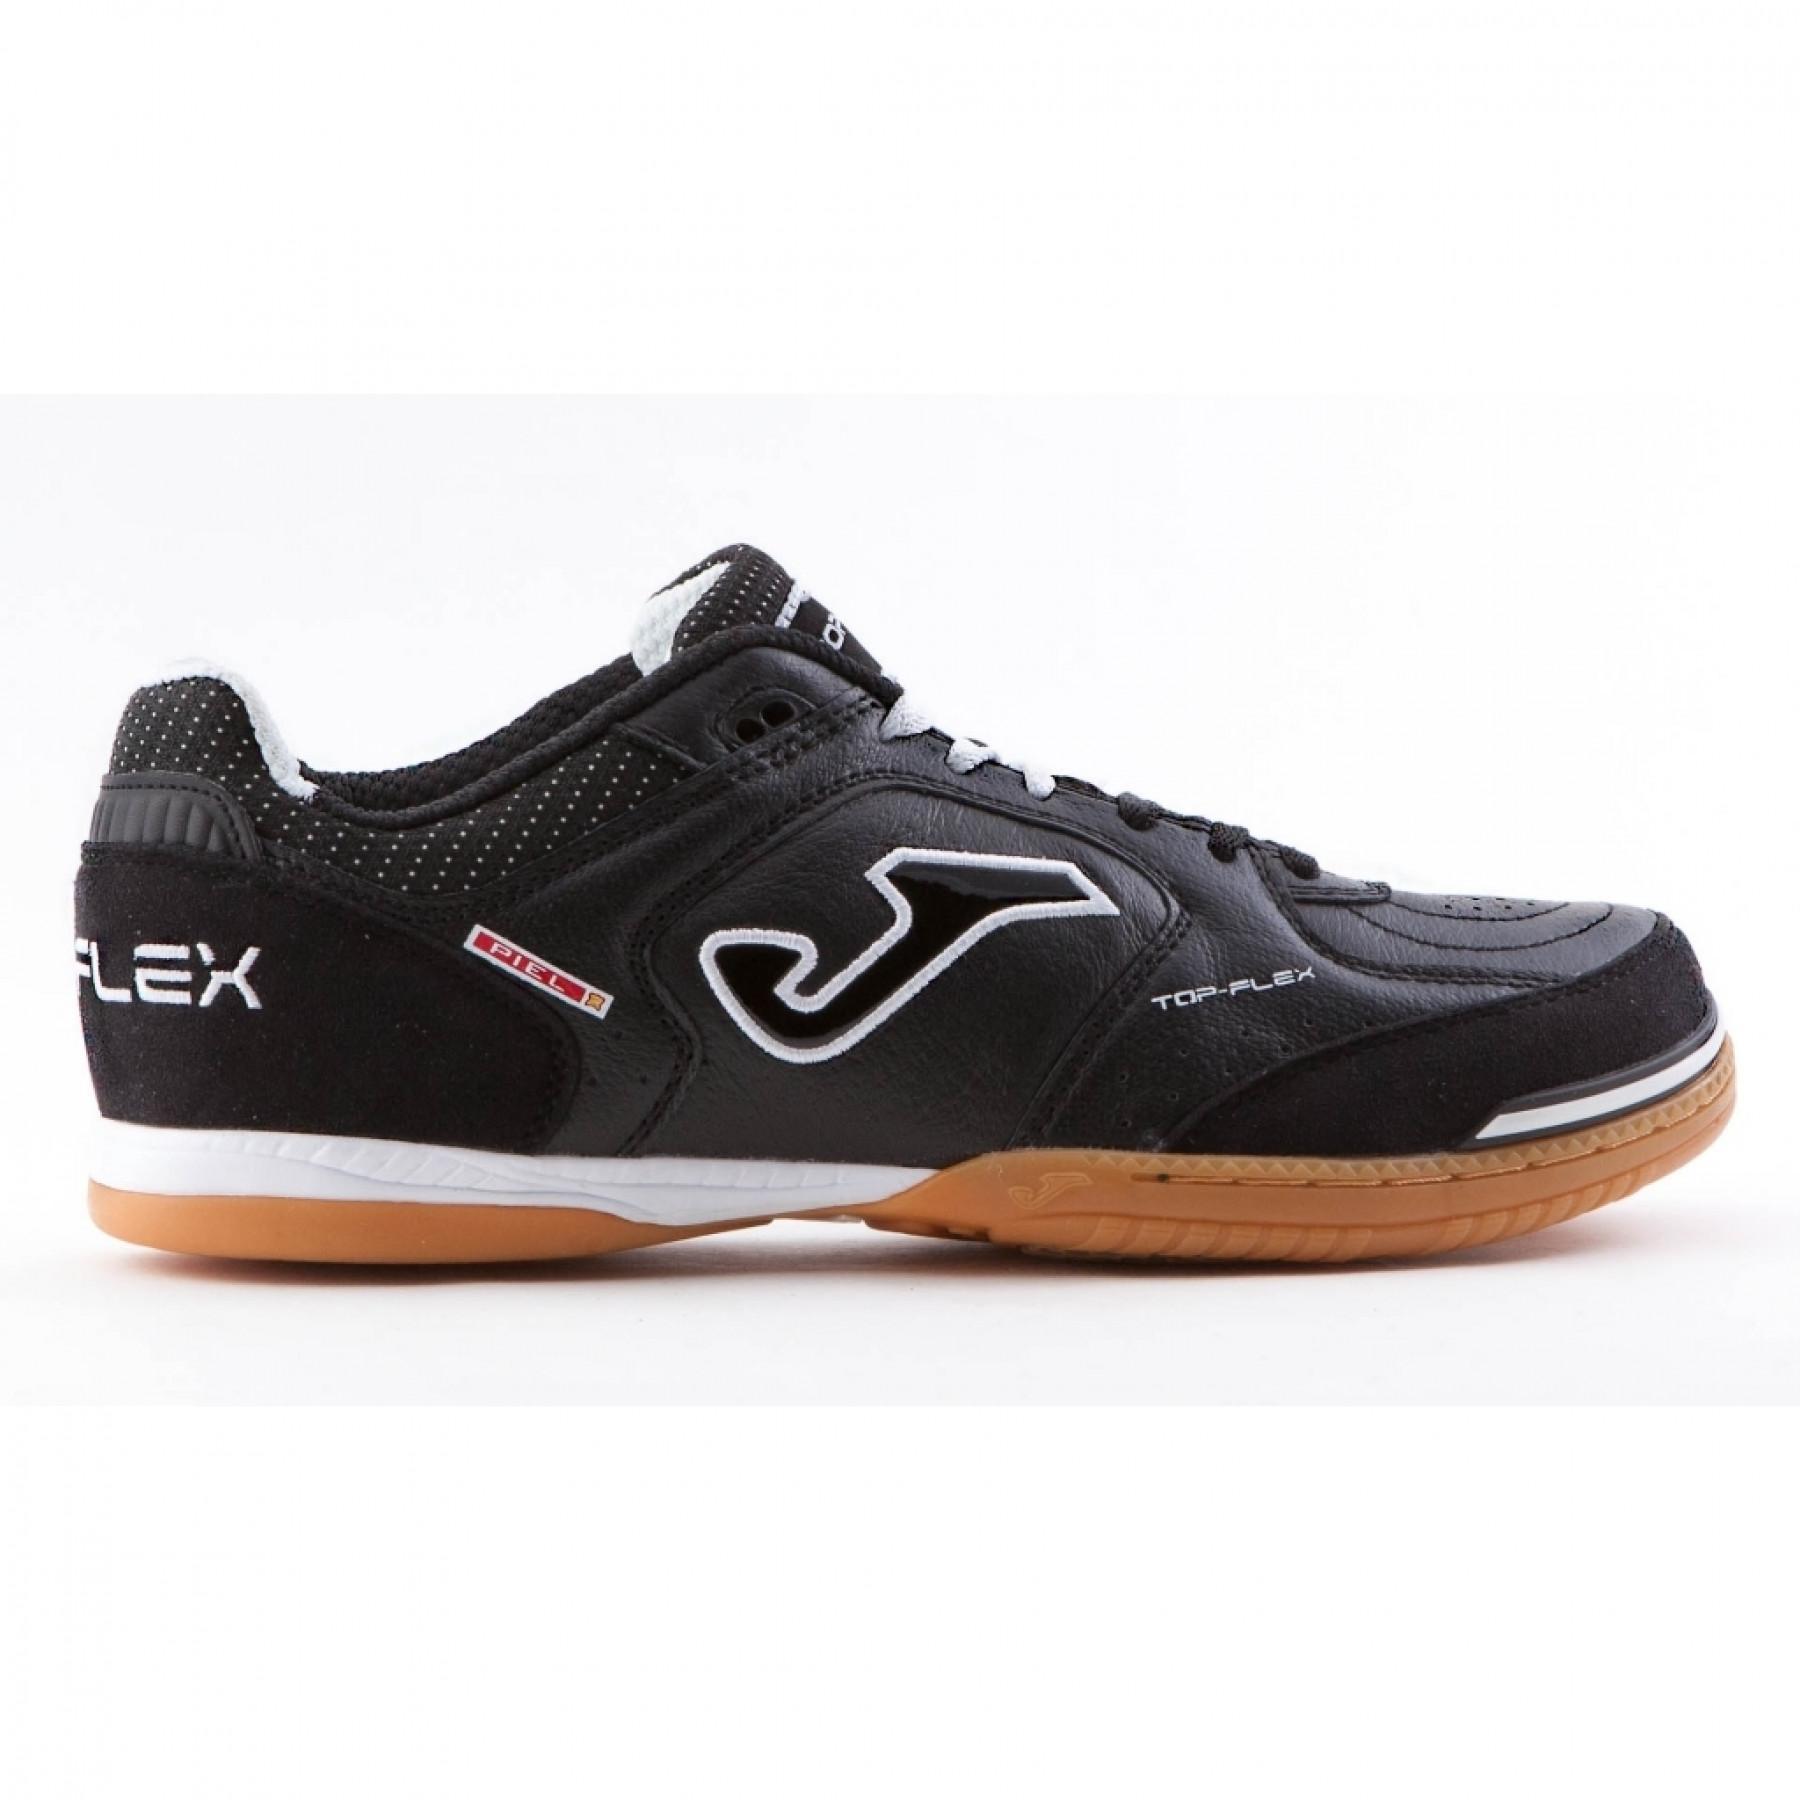 Chaussures Joma Top flex 301 IN